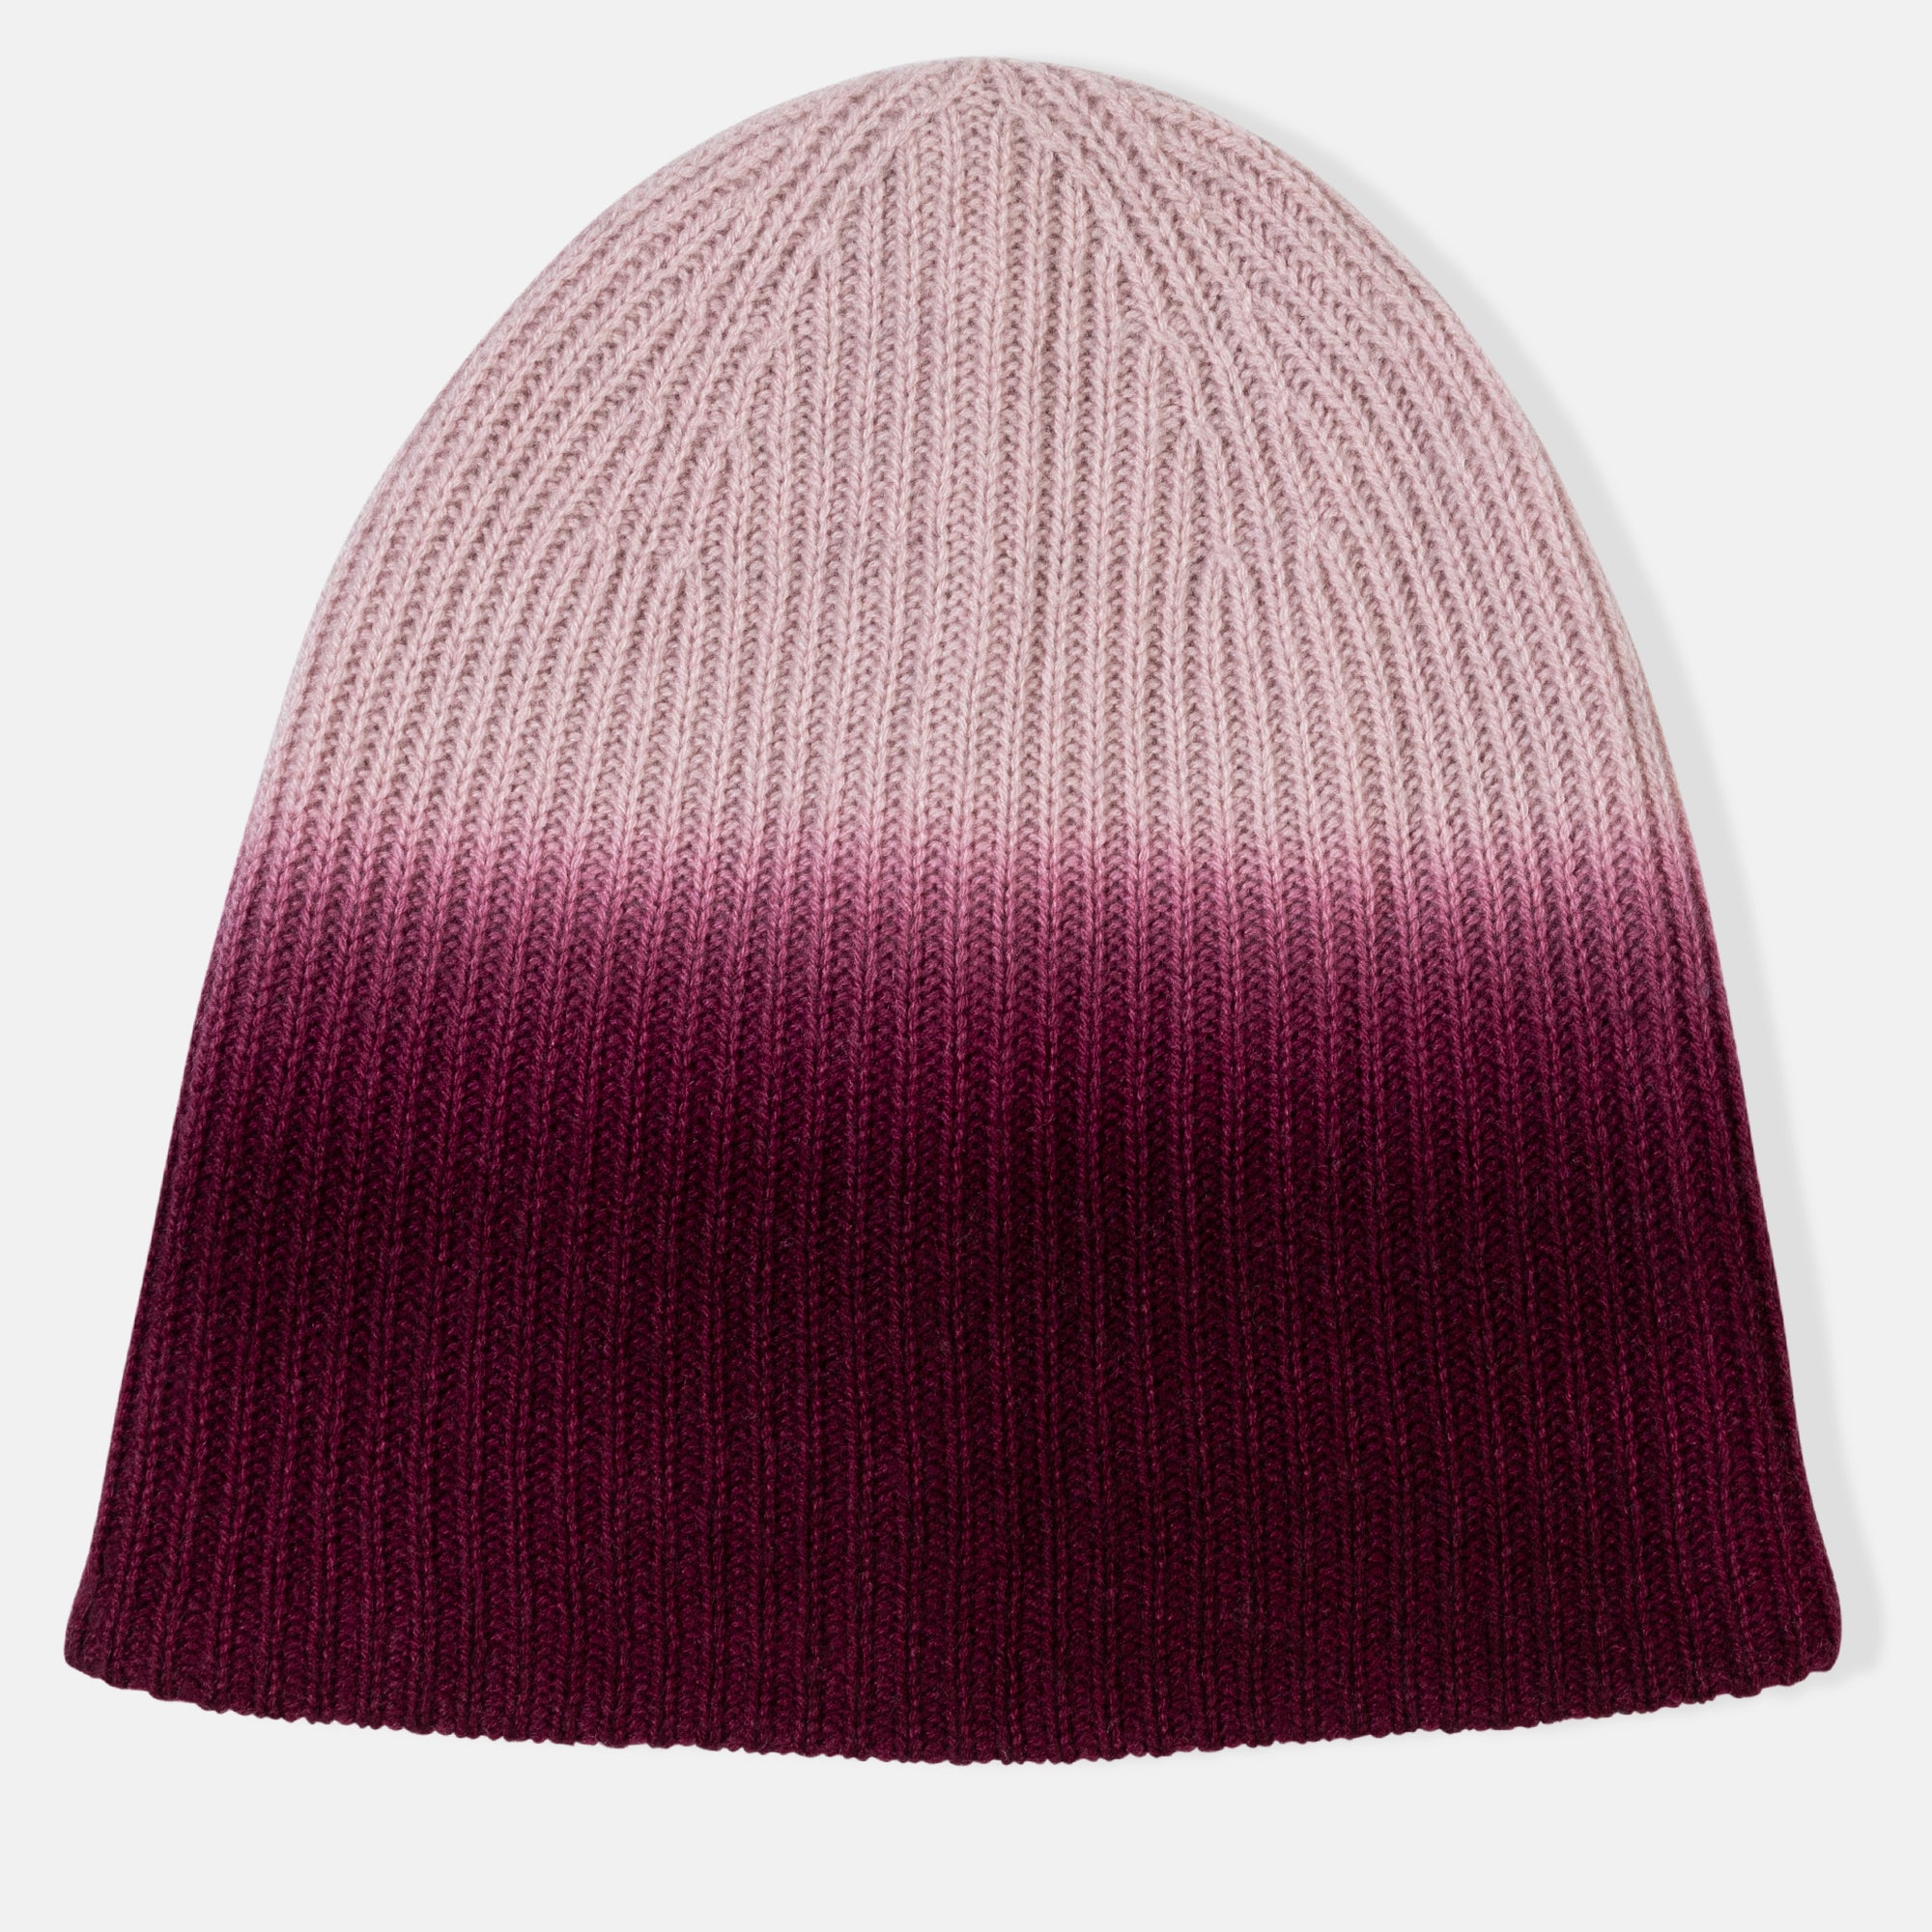 Picture of a woman in a chunky rib knit slouchy hat with an ombre design in pink to burgundy.